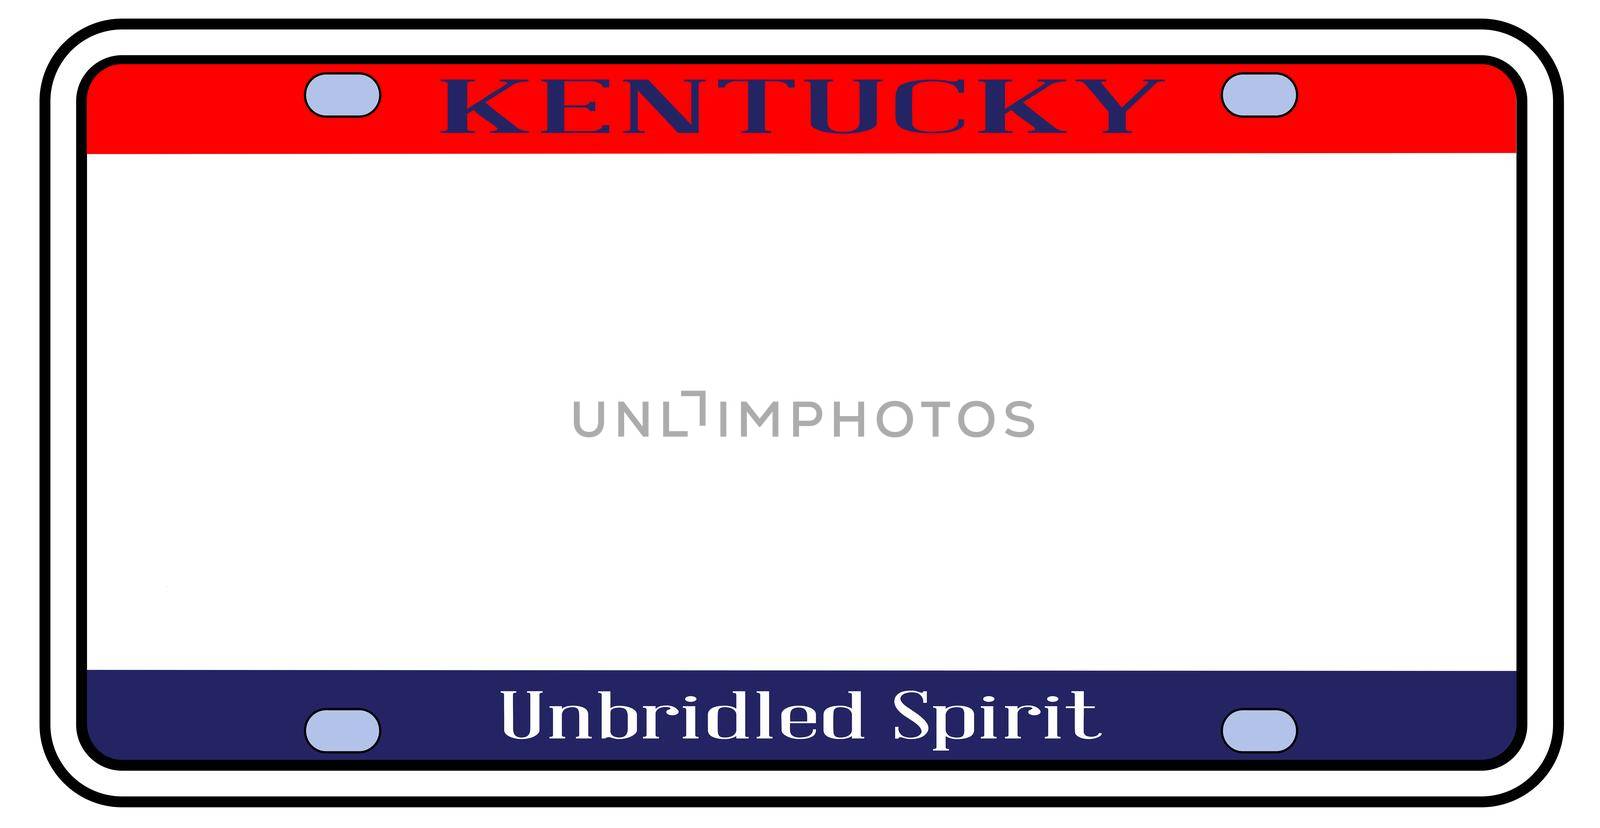 Kentucky state license plate in the colors of the state flag with the flag icons over a white background